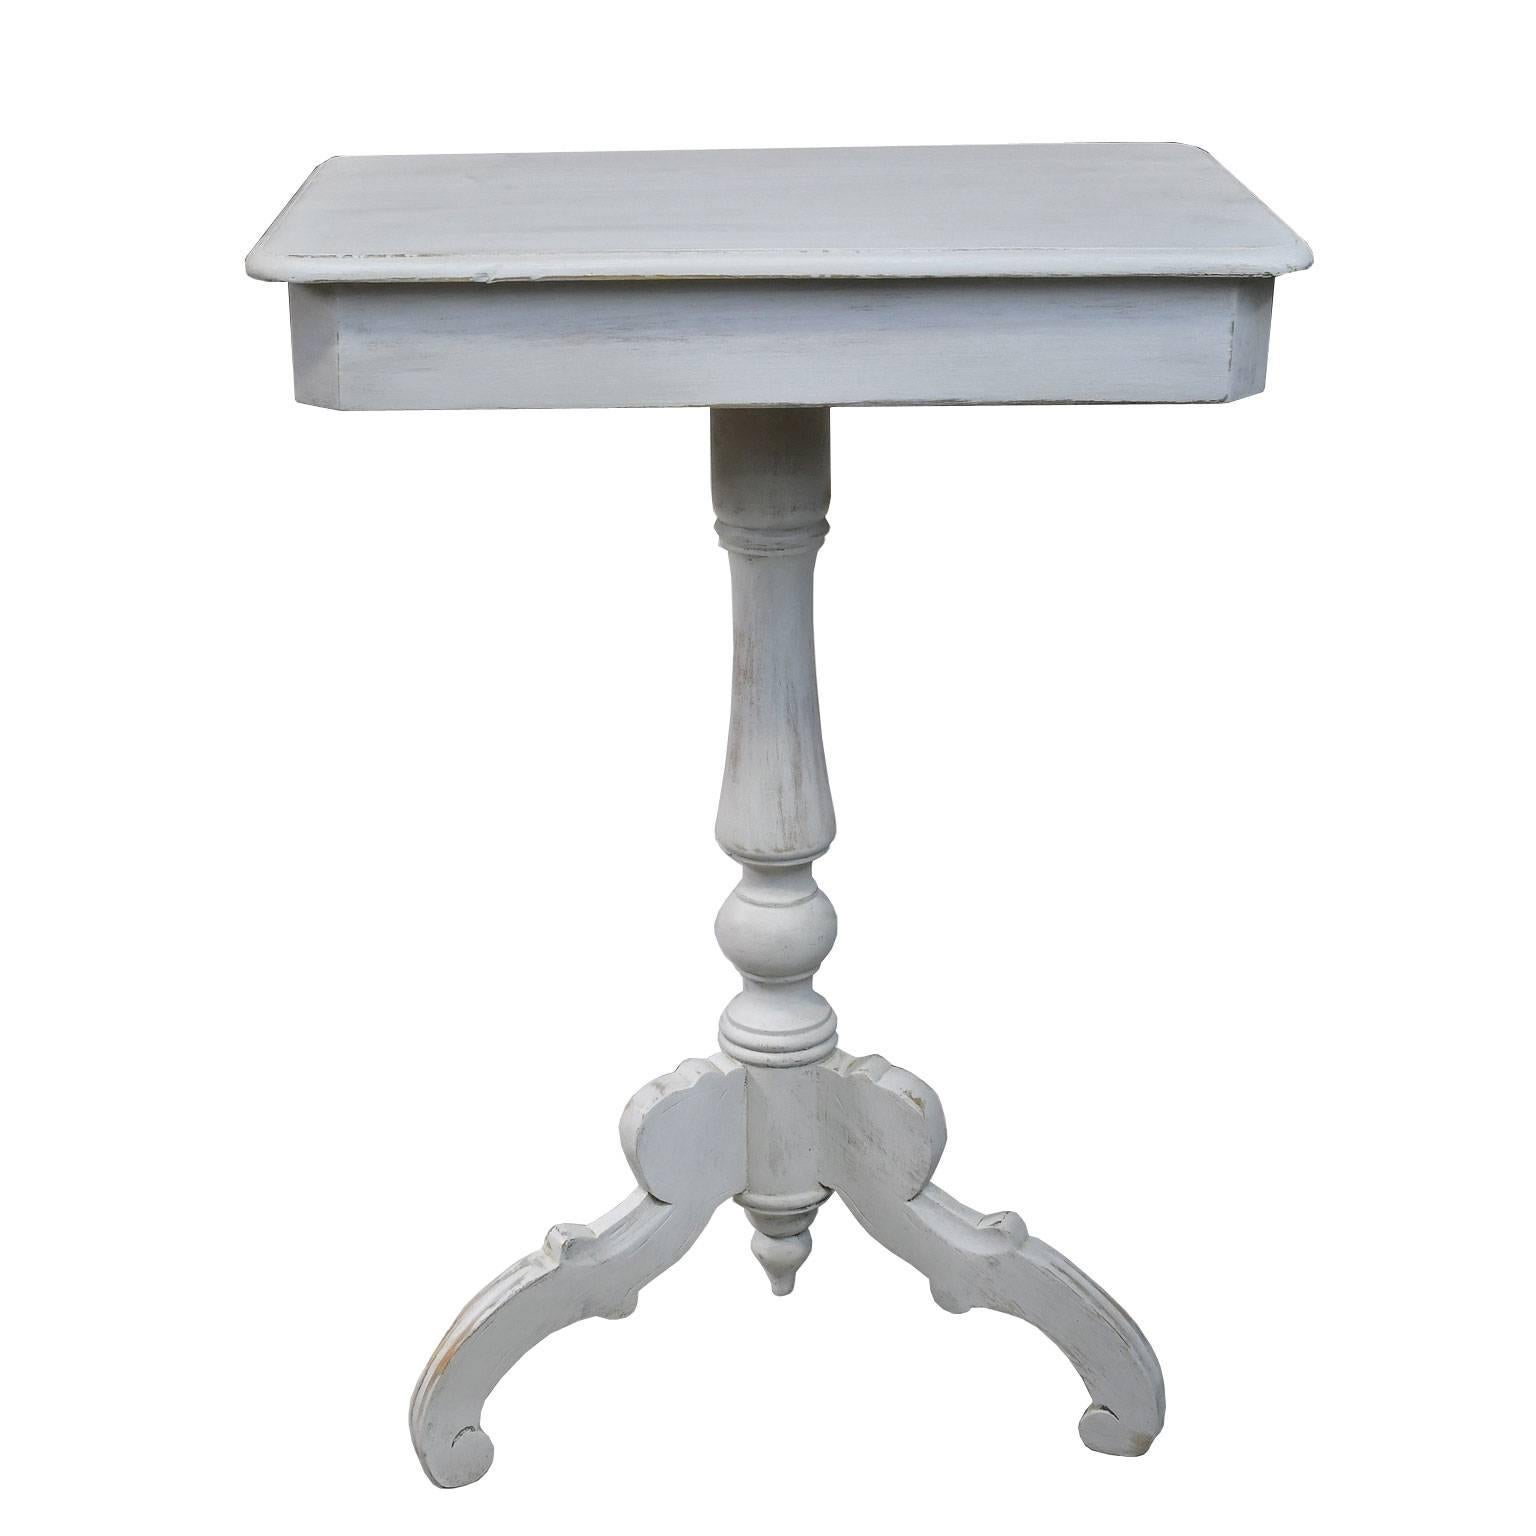 Early 19th Century Swedish Gustavian End Table on Tri-foot Pedestal w/ Grey/White Paint, c. 1825 For Sale